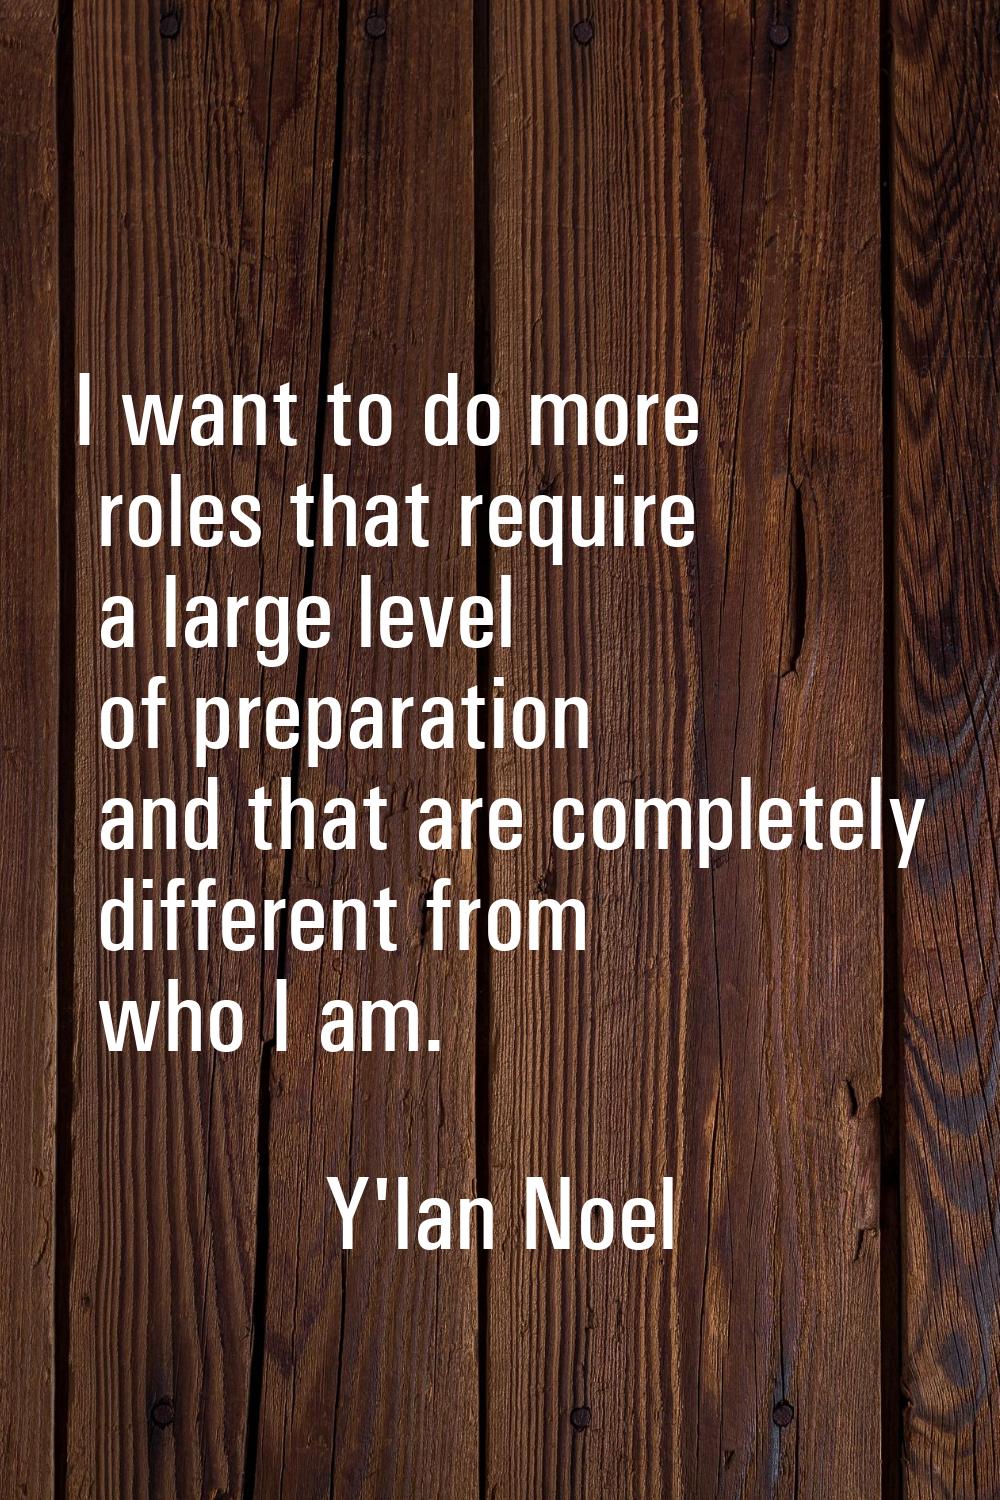 I want to do more roles that require a large level of preparation and that are completely different